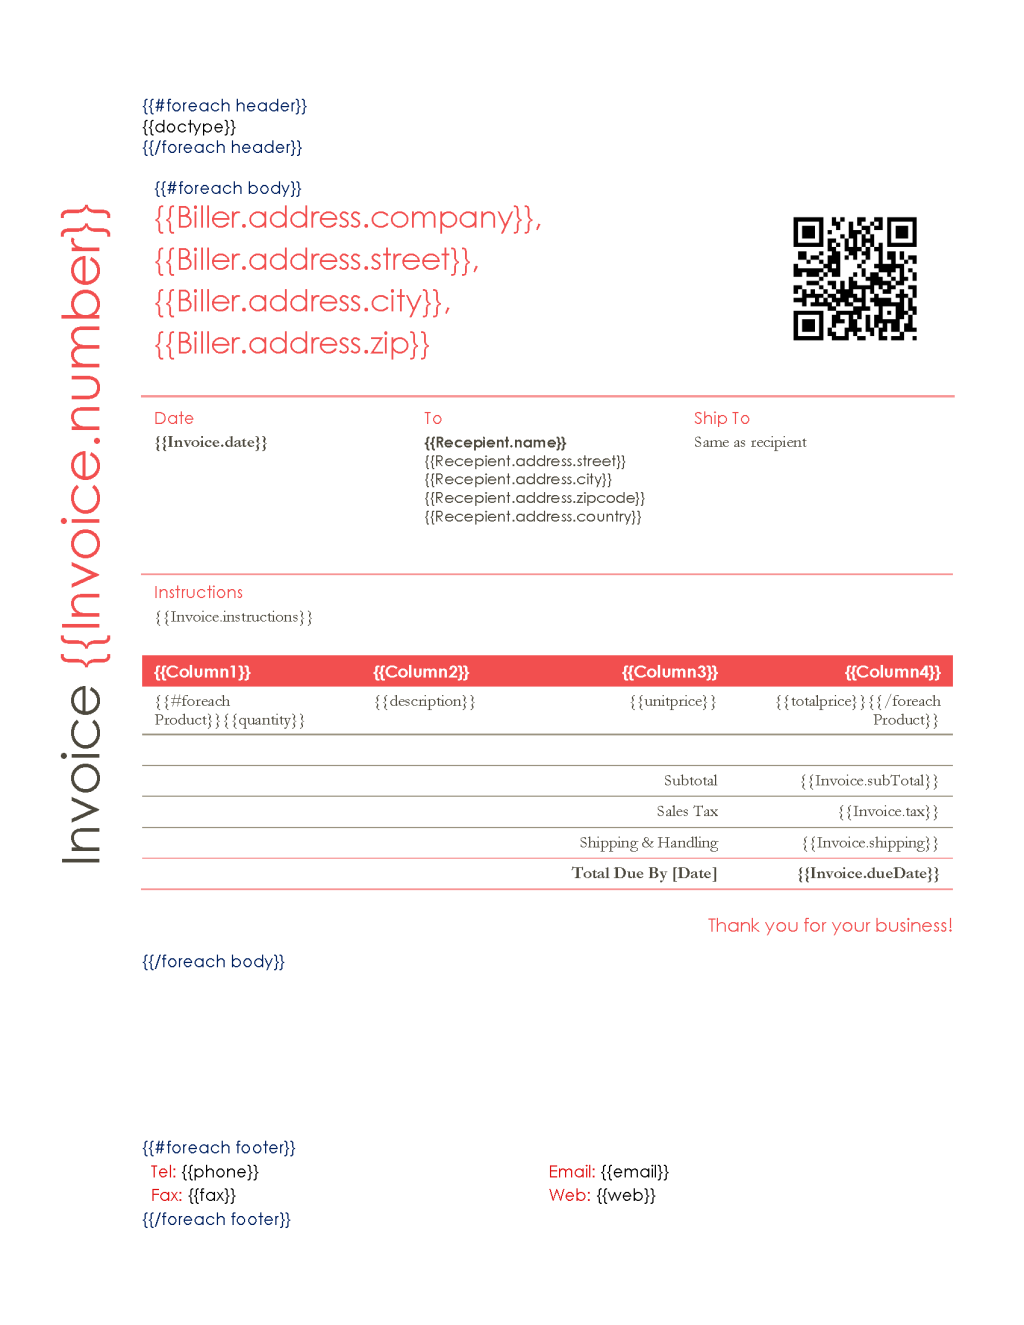 Sample invoice template for mail merge